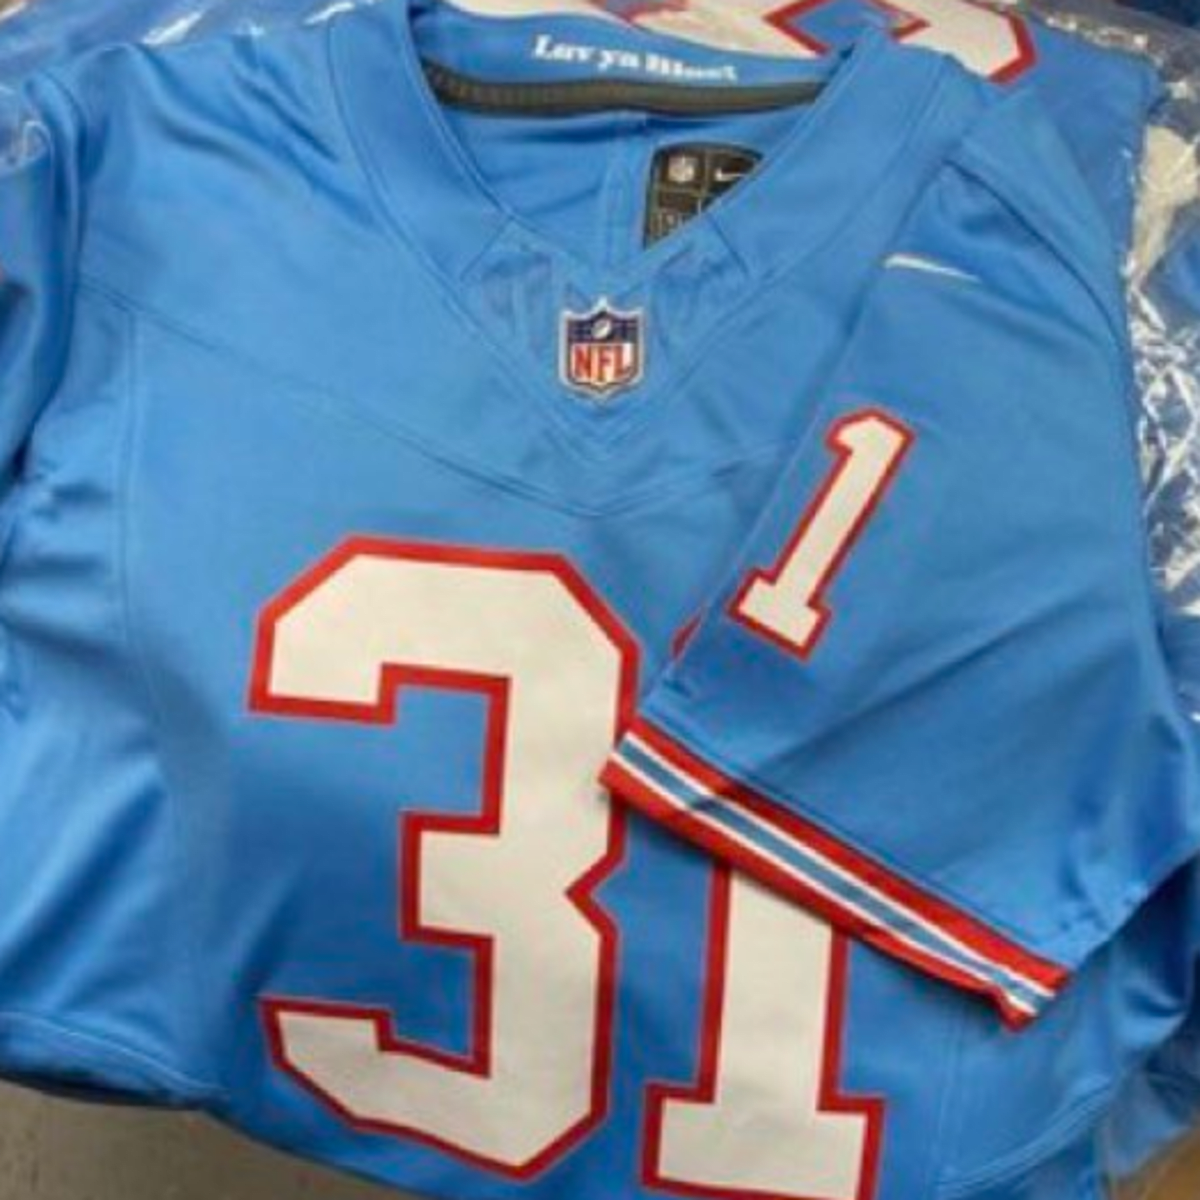 Luv Ya Blue in Tennesee: Titans unveil Houston Oilers throwback unis